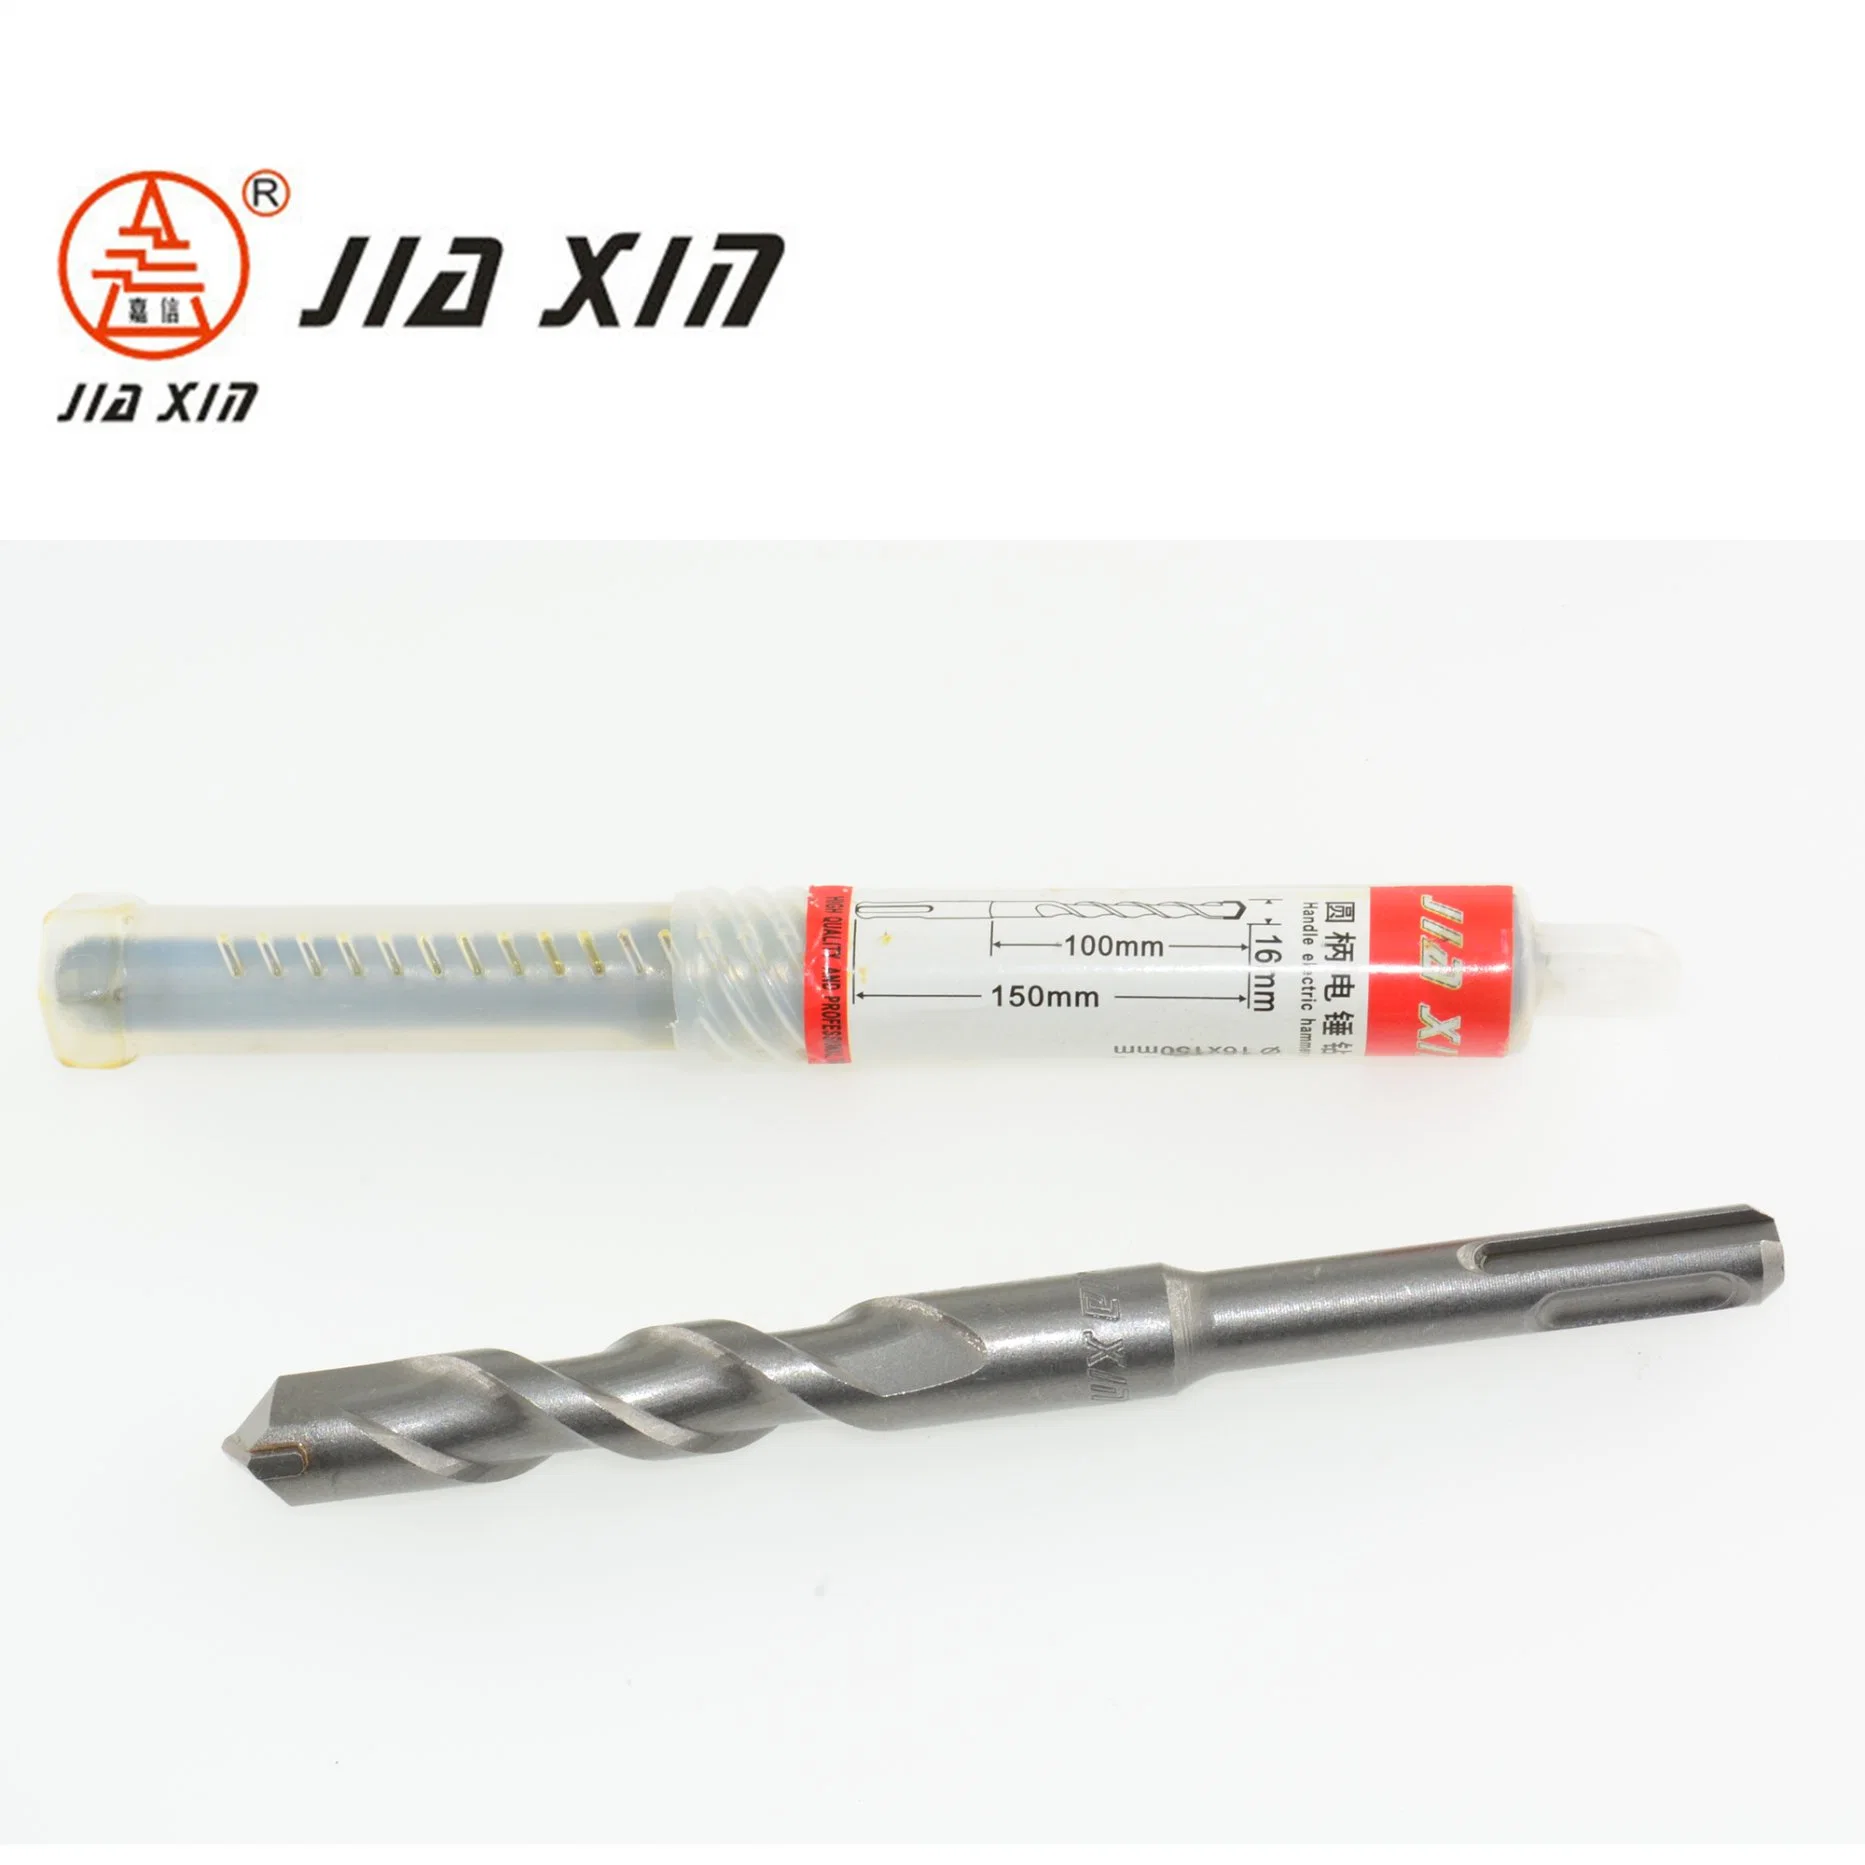 Yg8 Square Shank and Round Shank Electric Hammer Drill Bits